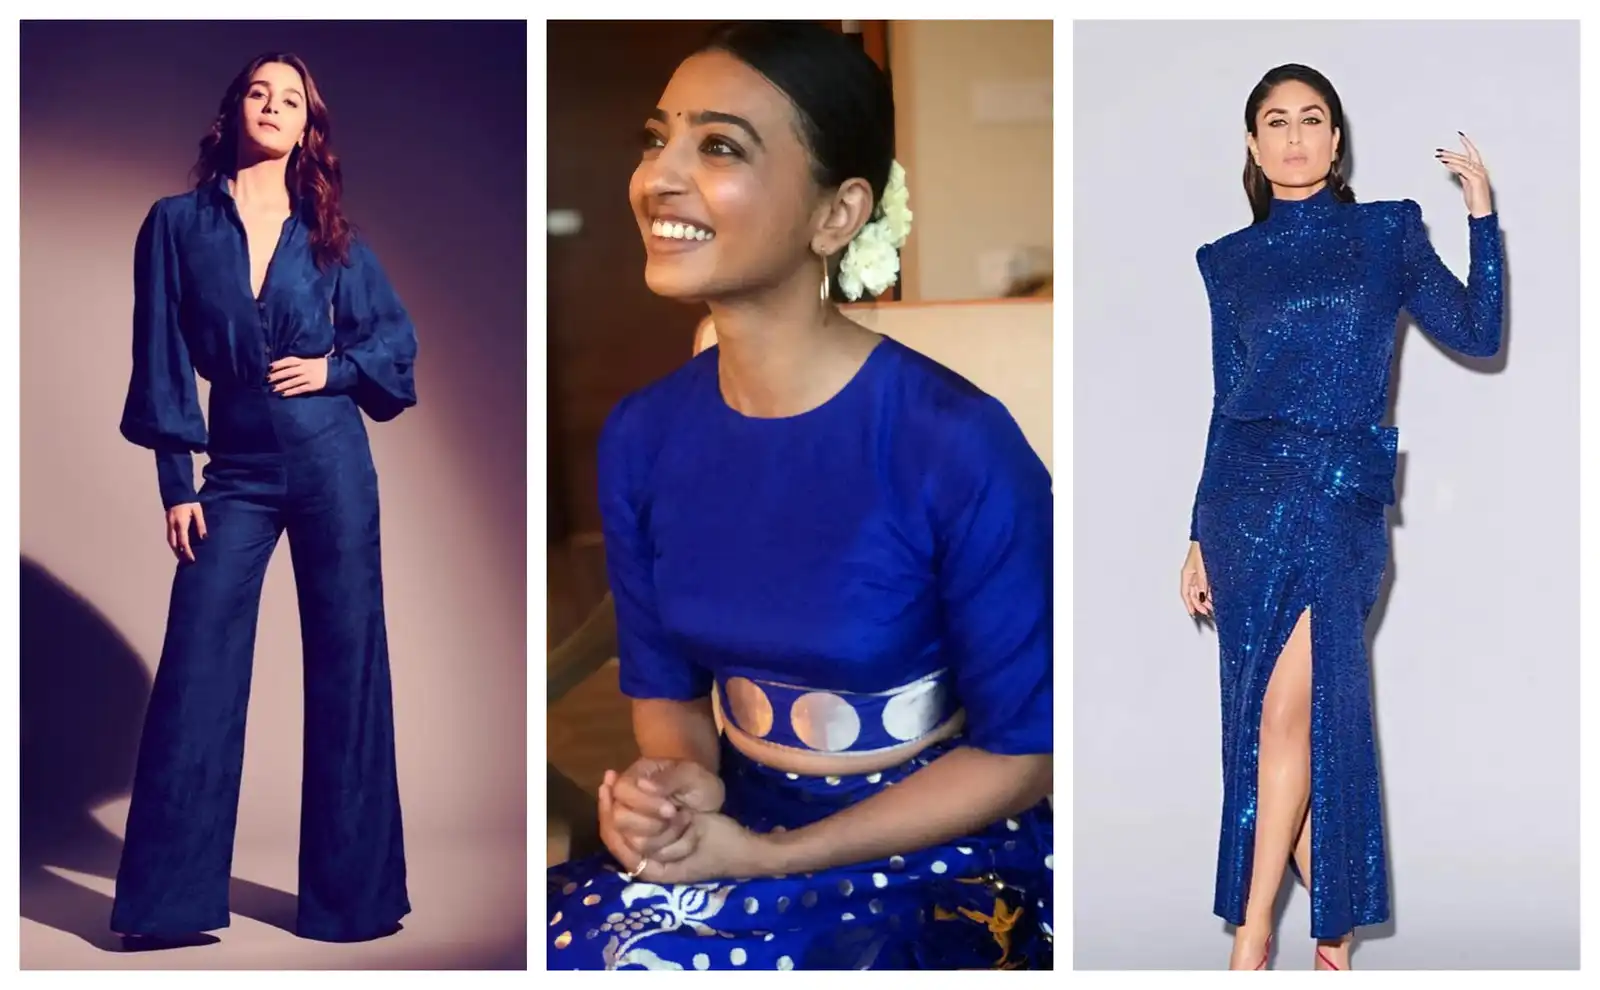 In Pictures: Bollywood Divas Show You How To Don The Pantone Color Of The Year 2020 Classic Blue